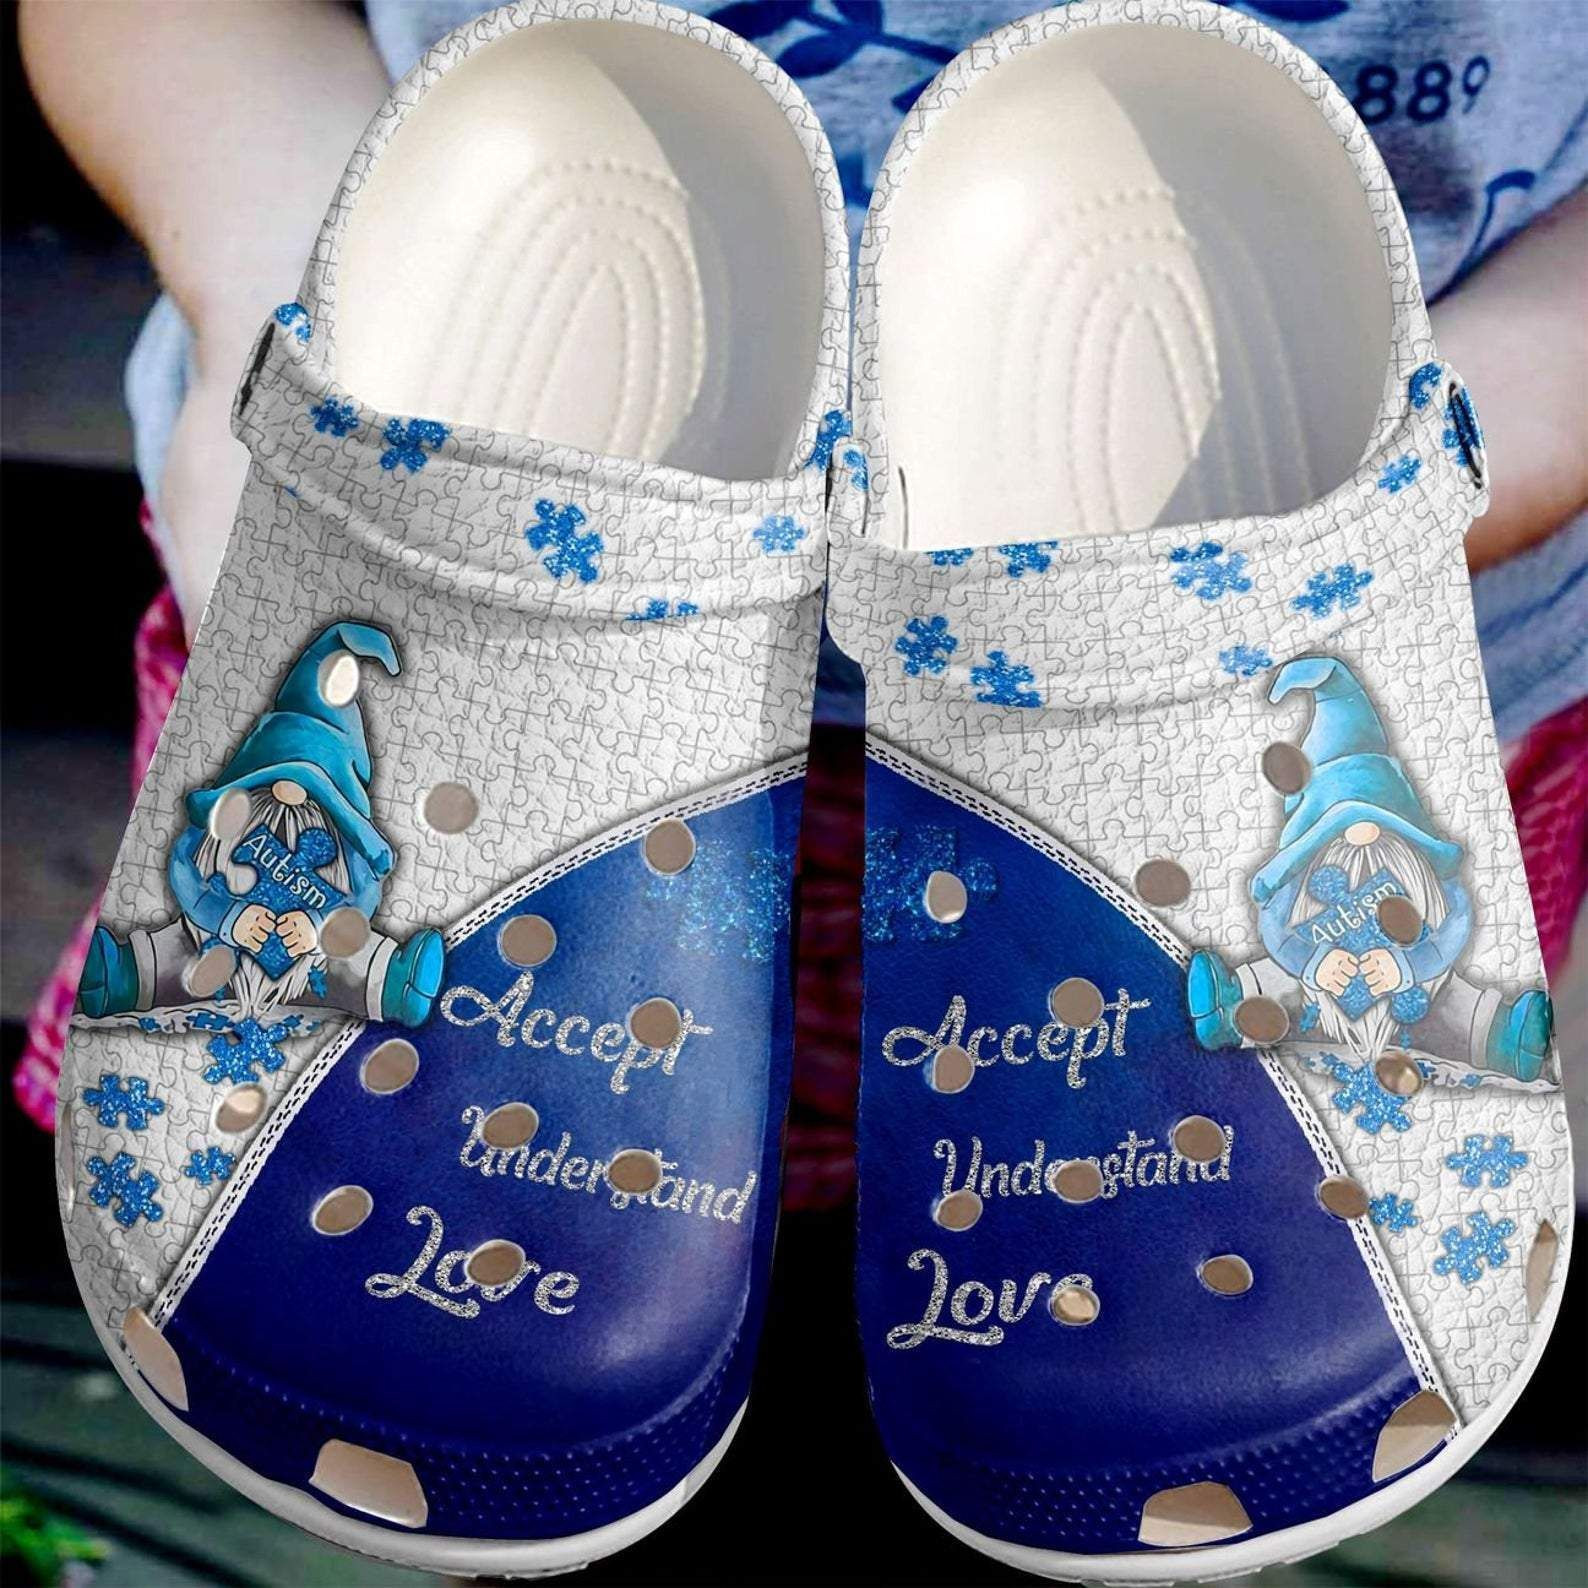 Blue Dwarfs Puzzle Autism Awareness, Accept Understand Love Clog Shoes Birthday Gift For Mens And Womens